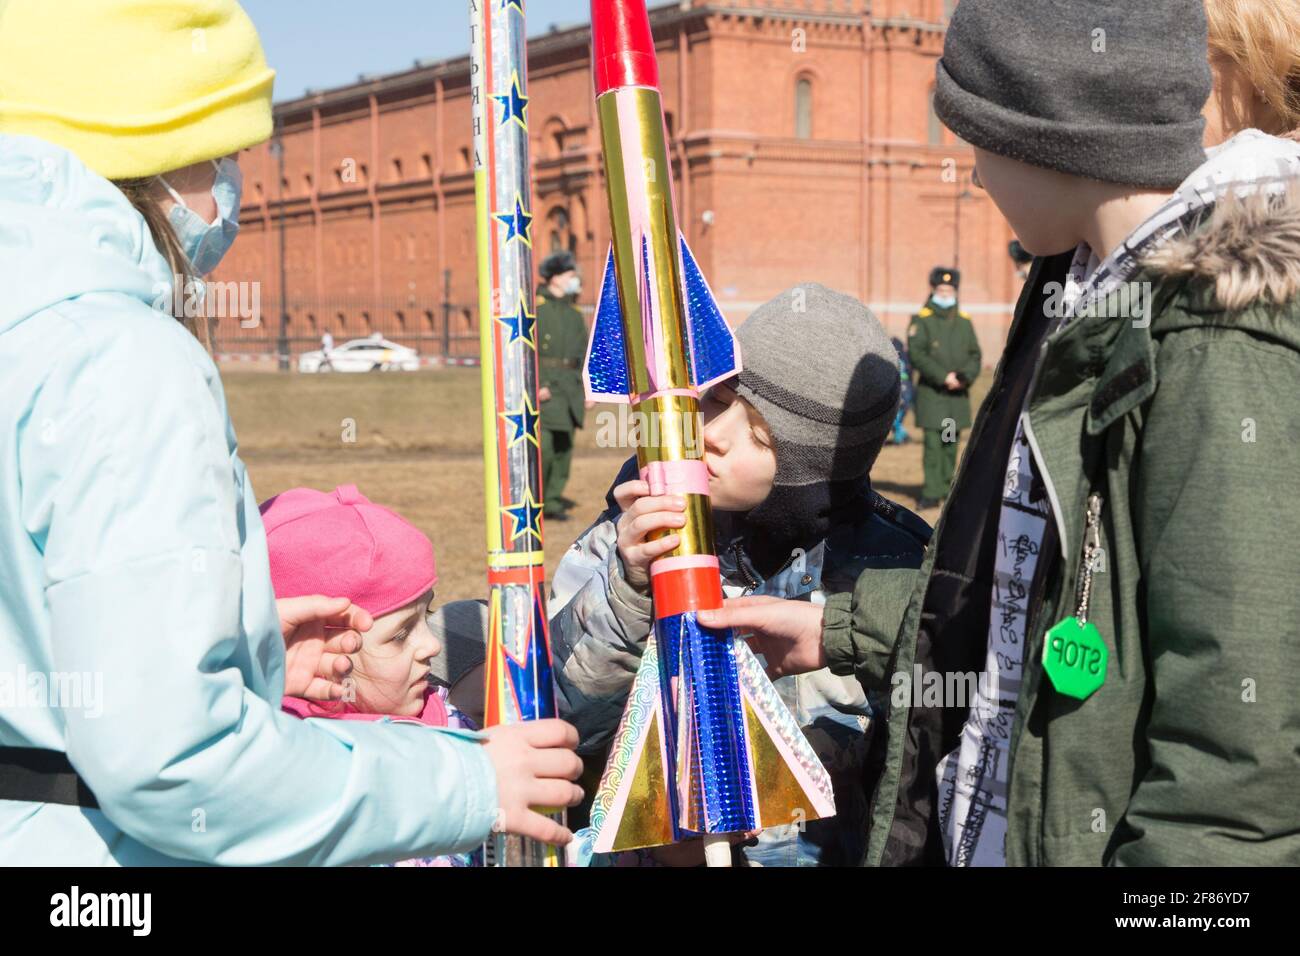 St. Petersburg, Russia. 11th Apr, 2021. A rocket enthusiast kisses a rocket model in commemoration of the 60th anniversary of the first human space flight in St. Petersburg, Russia, April 11, 2021. Credit: Irina Motina/Xinhua/Alamy Live News Stock Photo